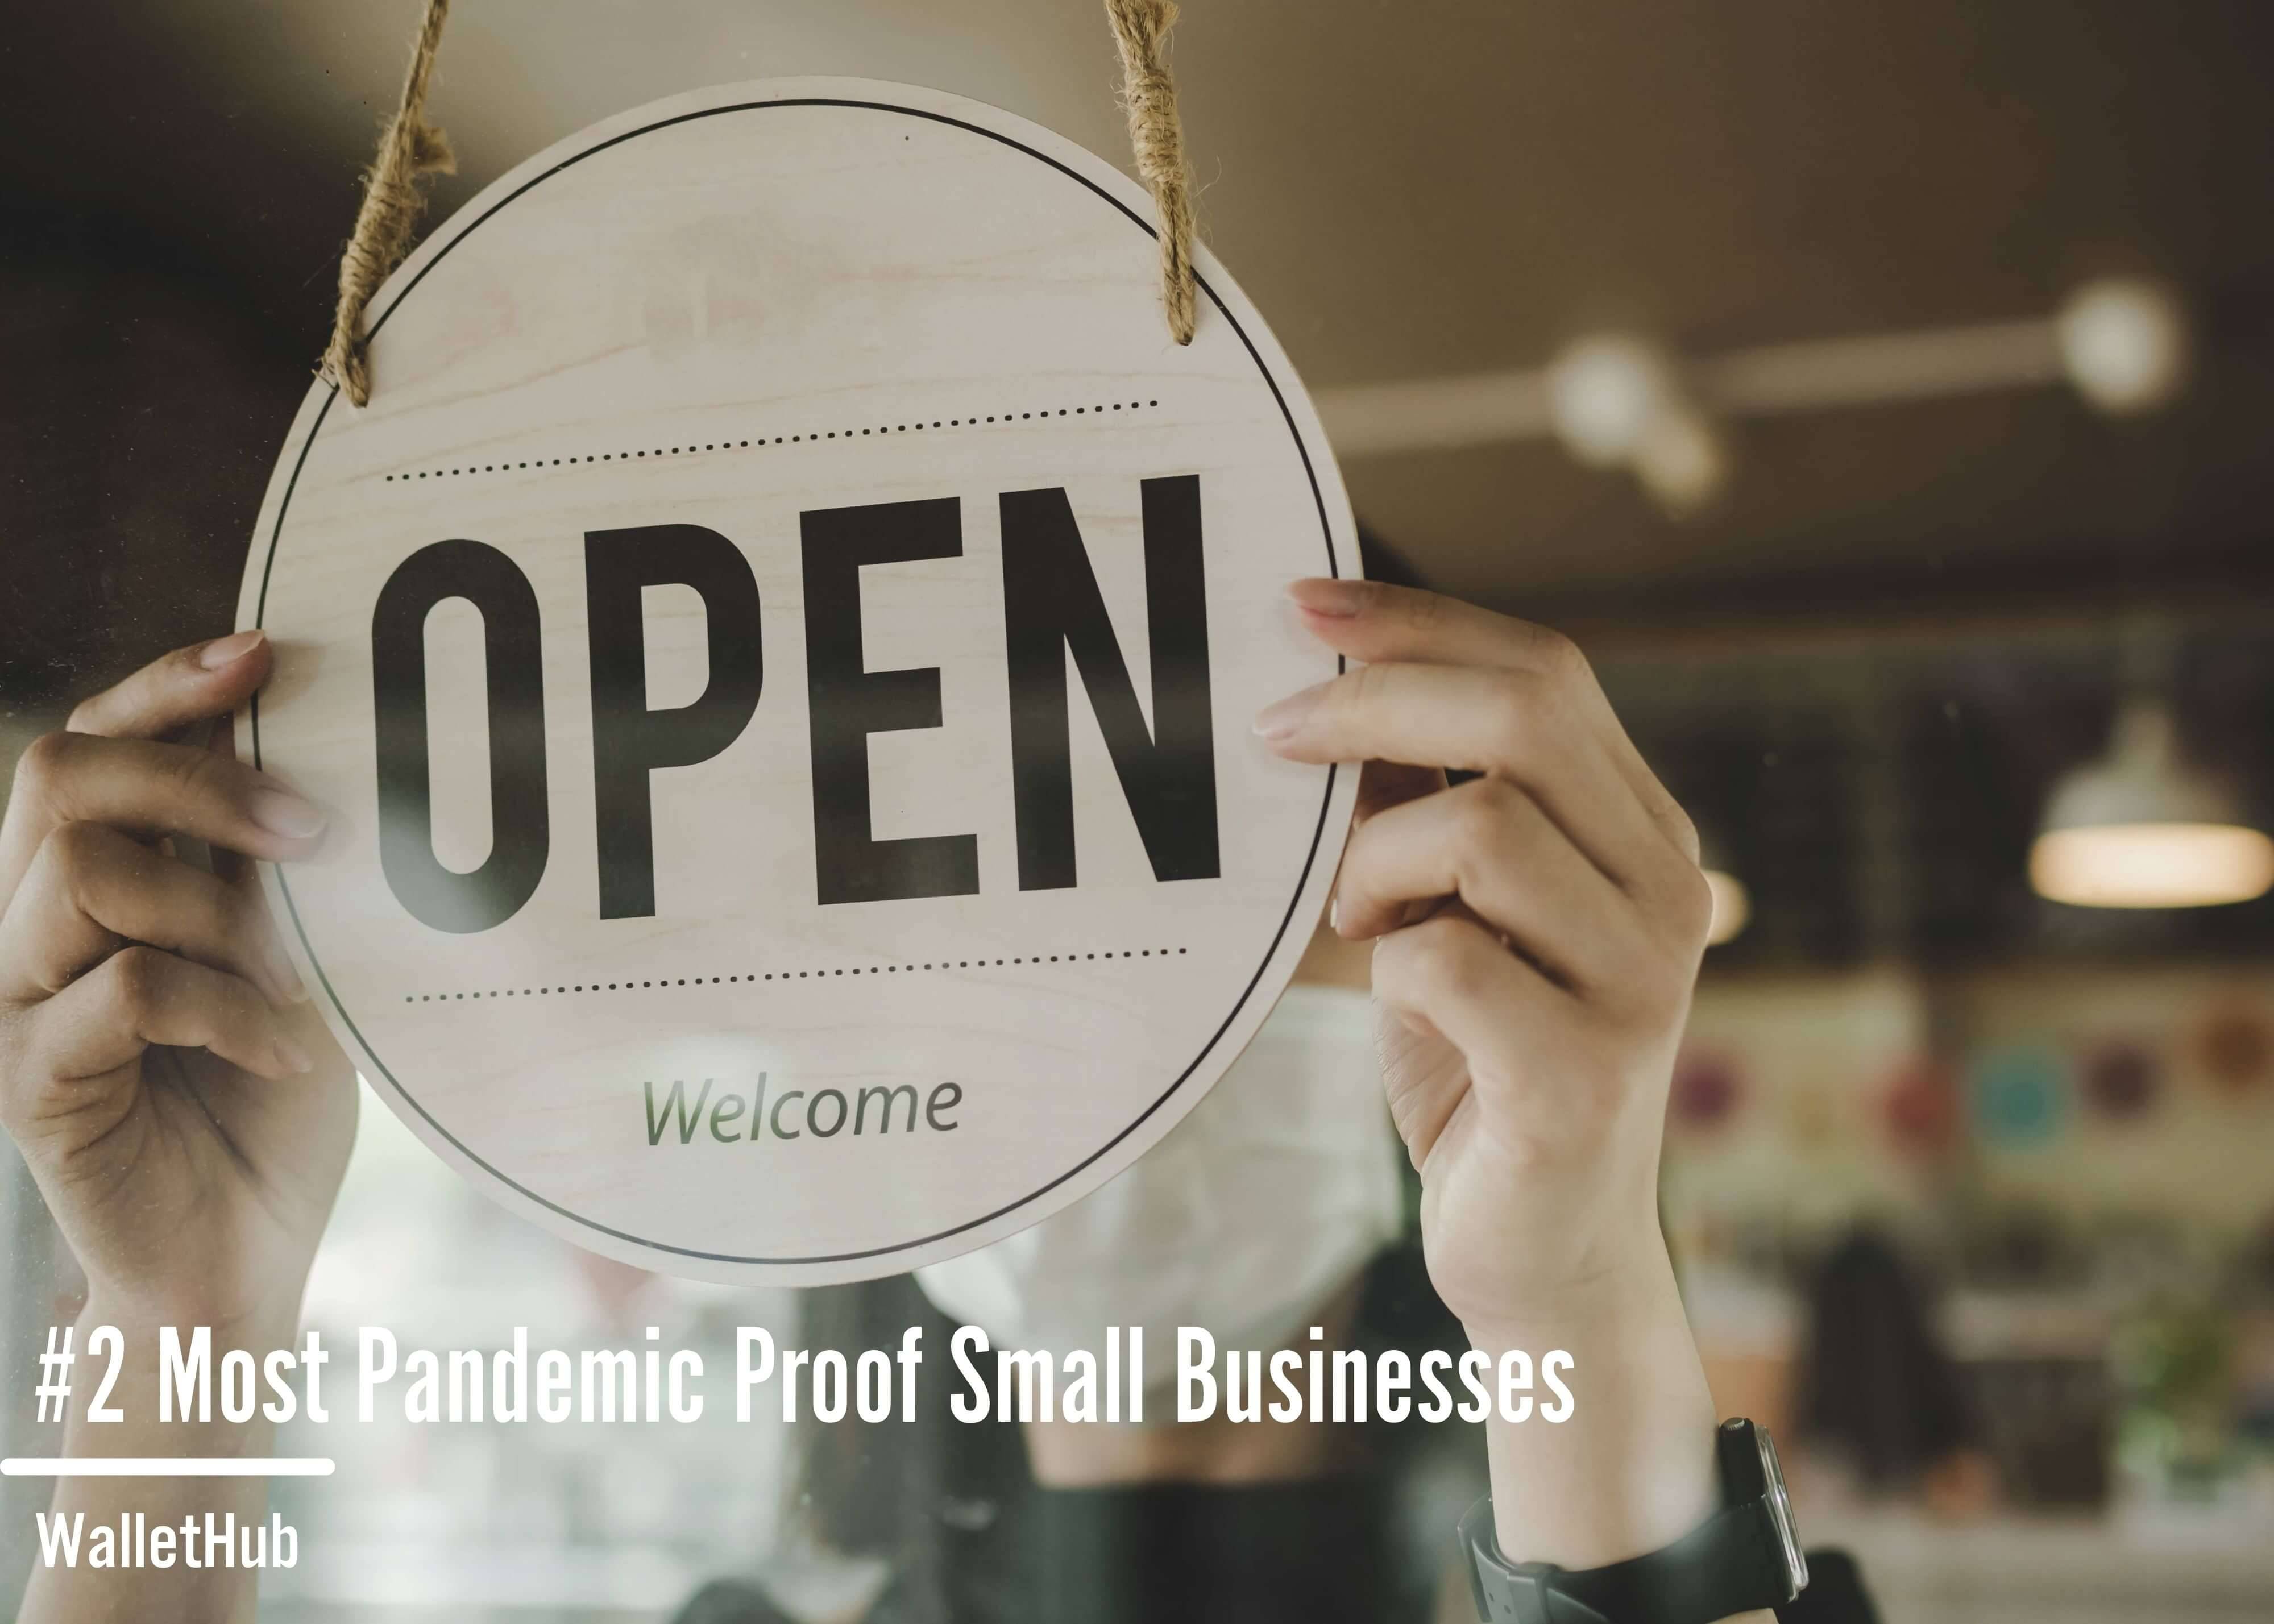 #2 Most Pandemic Proof Small Businesses